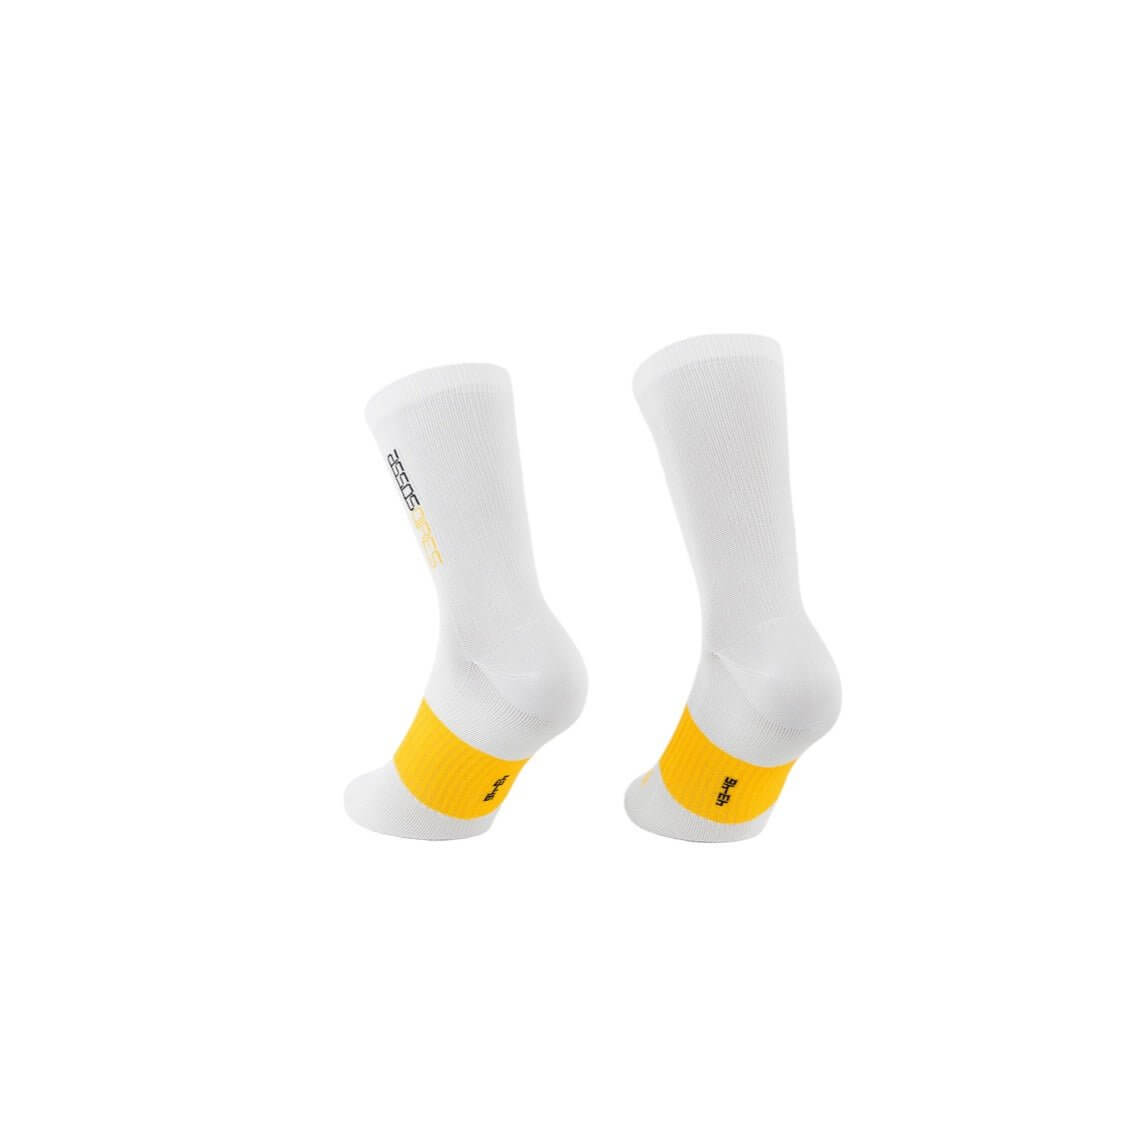 Assos of Switzerland Spring Fall Socks EVO | Strictly Bicycles